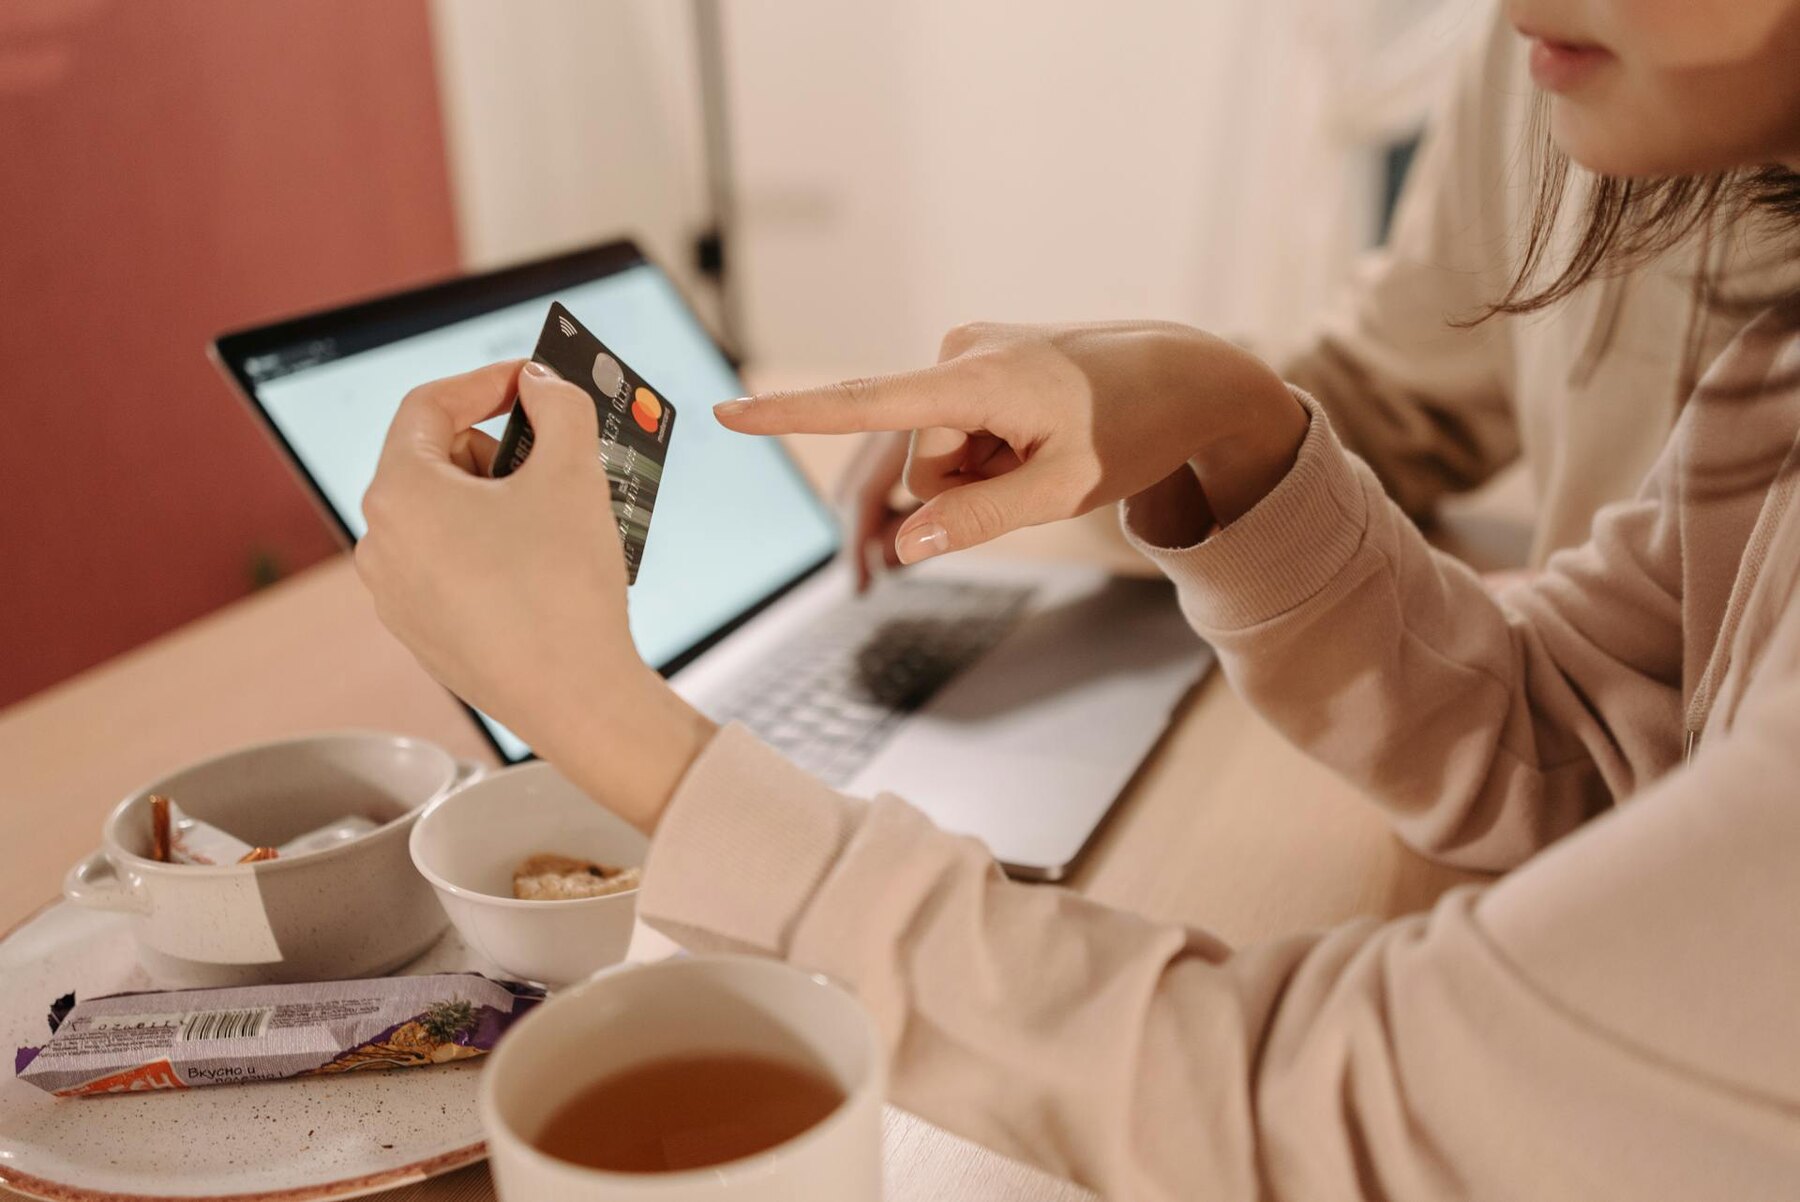 Woman pointing to a credit card she is holding with a laptop and food on the desk